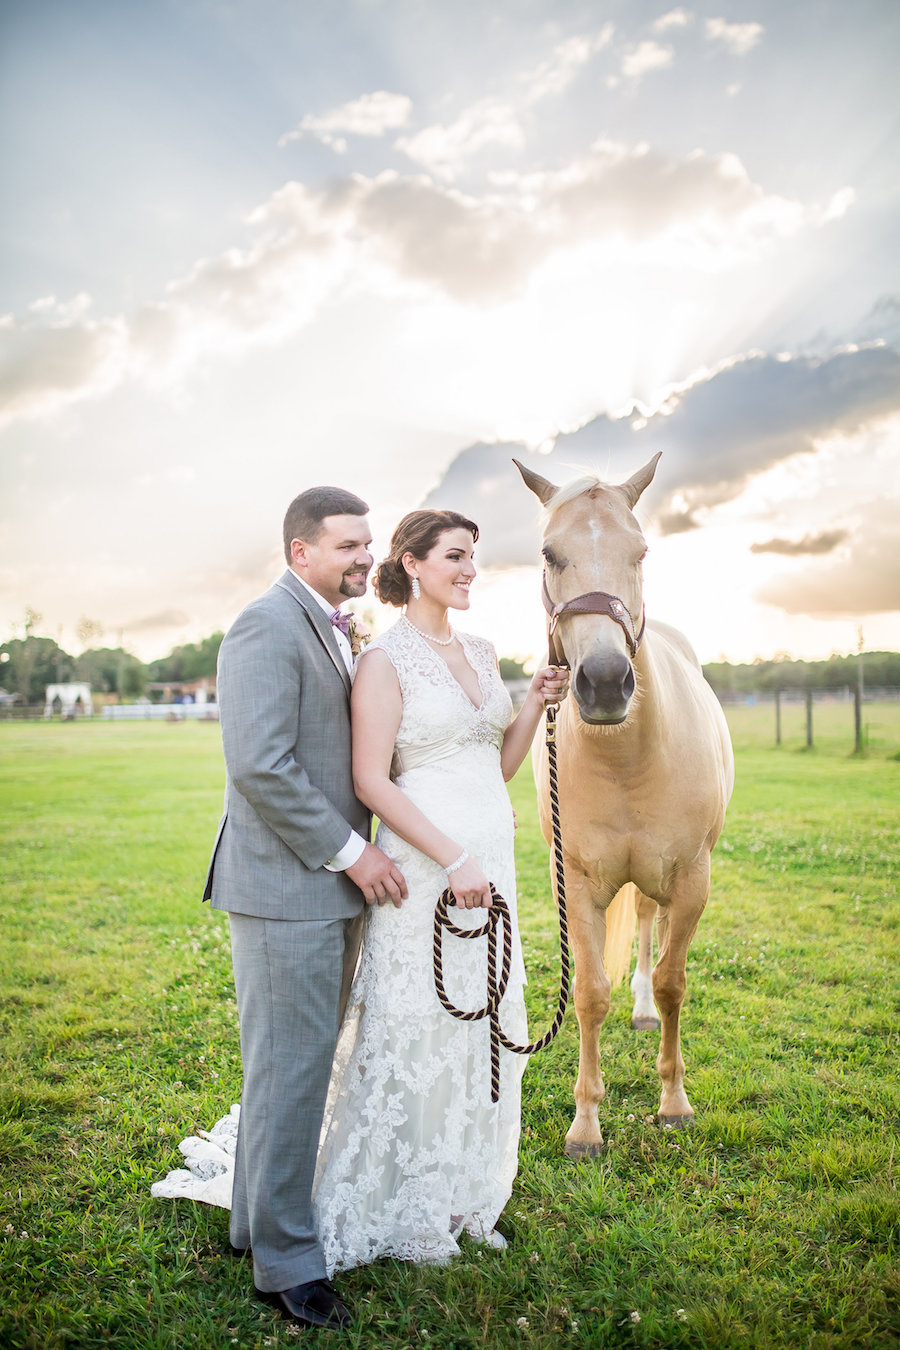 Rustic, Country Bride and Groom and Horse on Farm | Plant City Wedding Venue Wishing Well Barn | Tampa Wedding Photographer Rad Red Creative